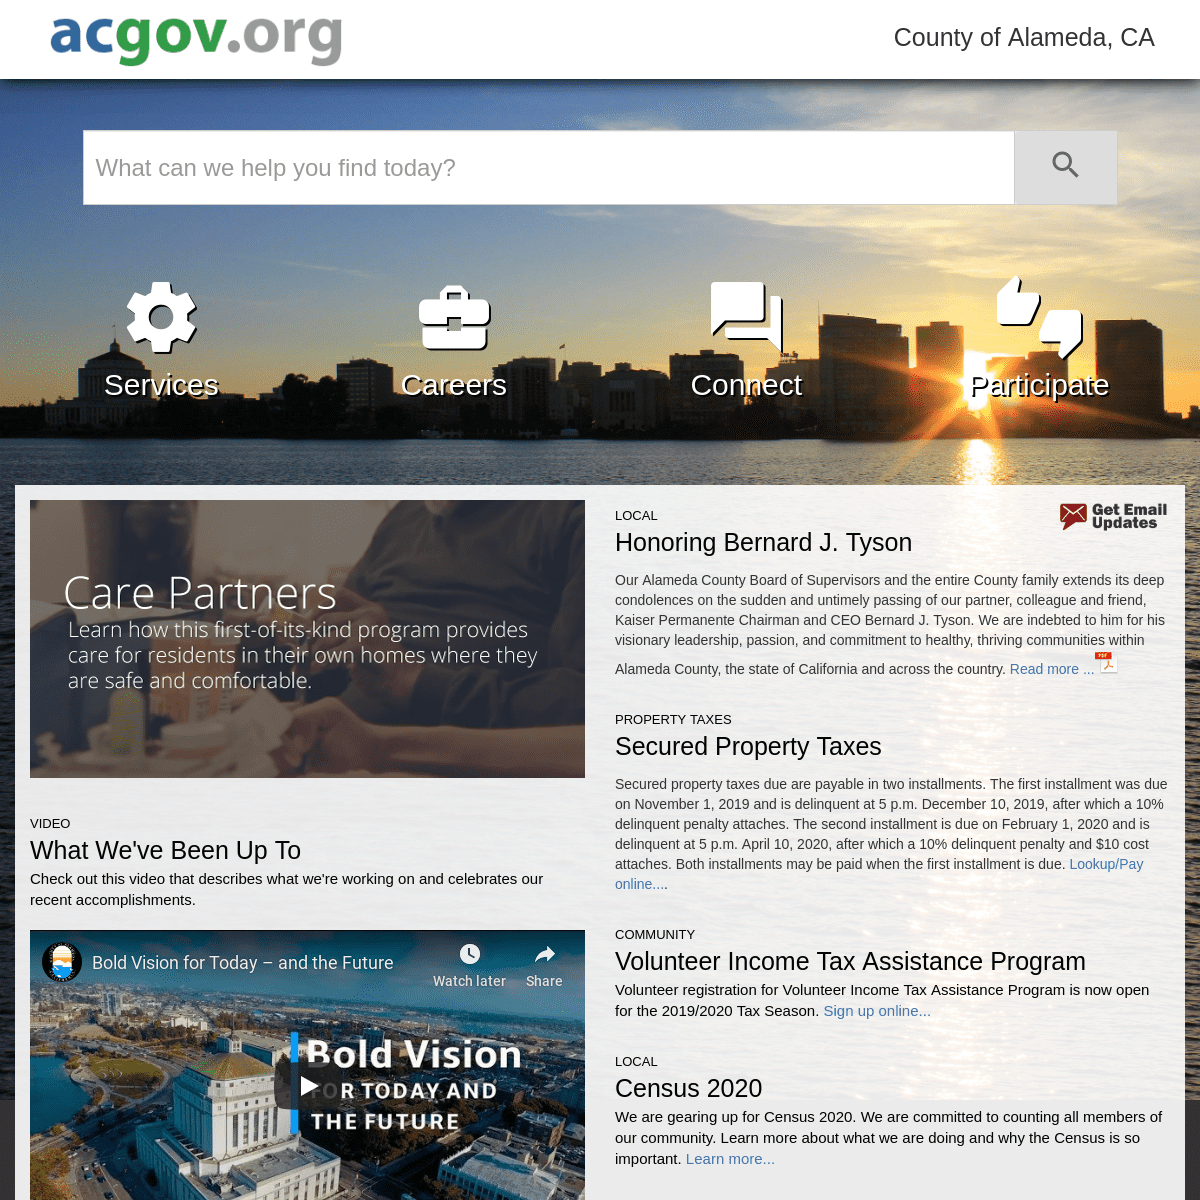 A complete backup of acgov.org